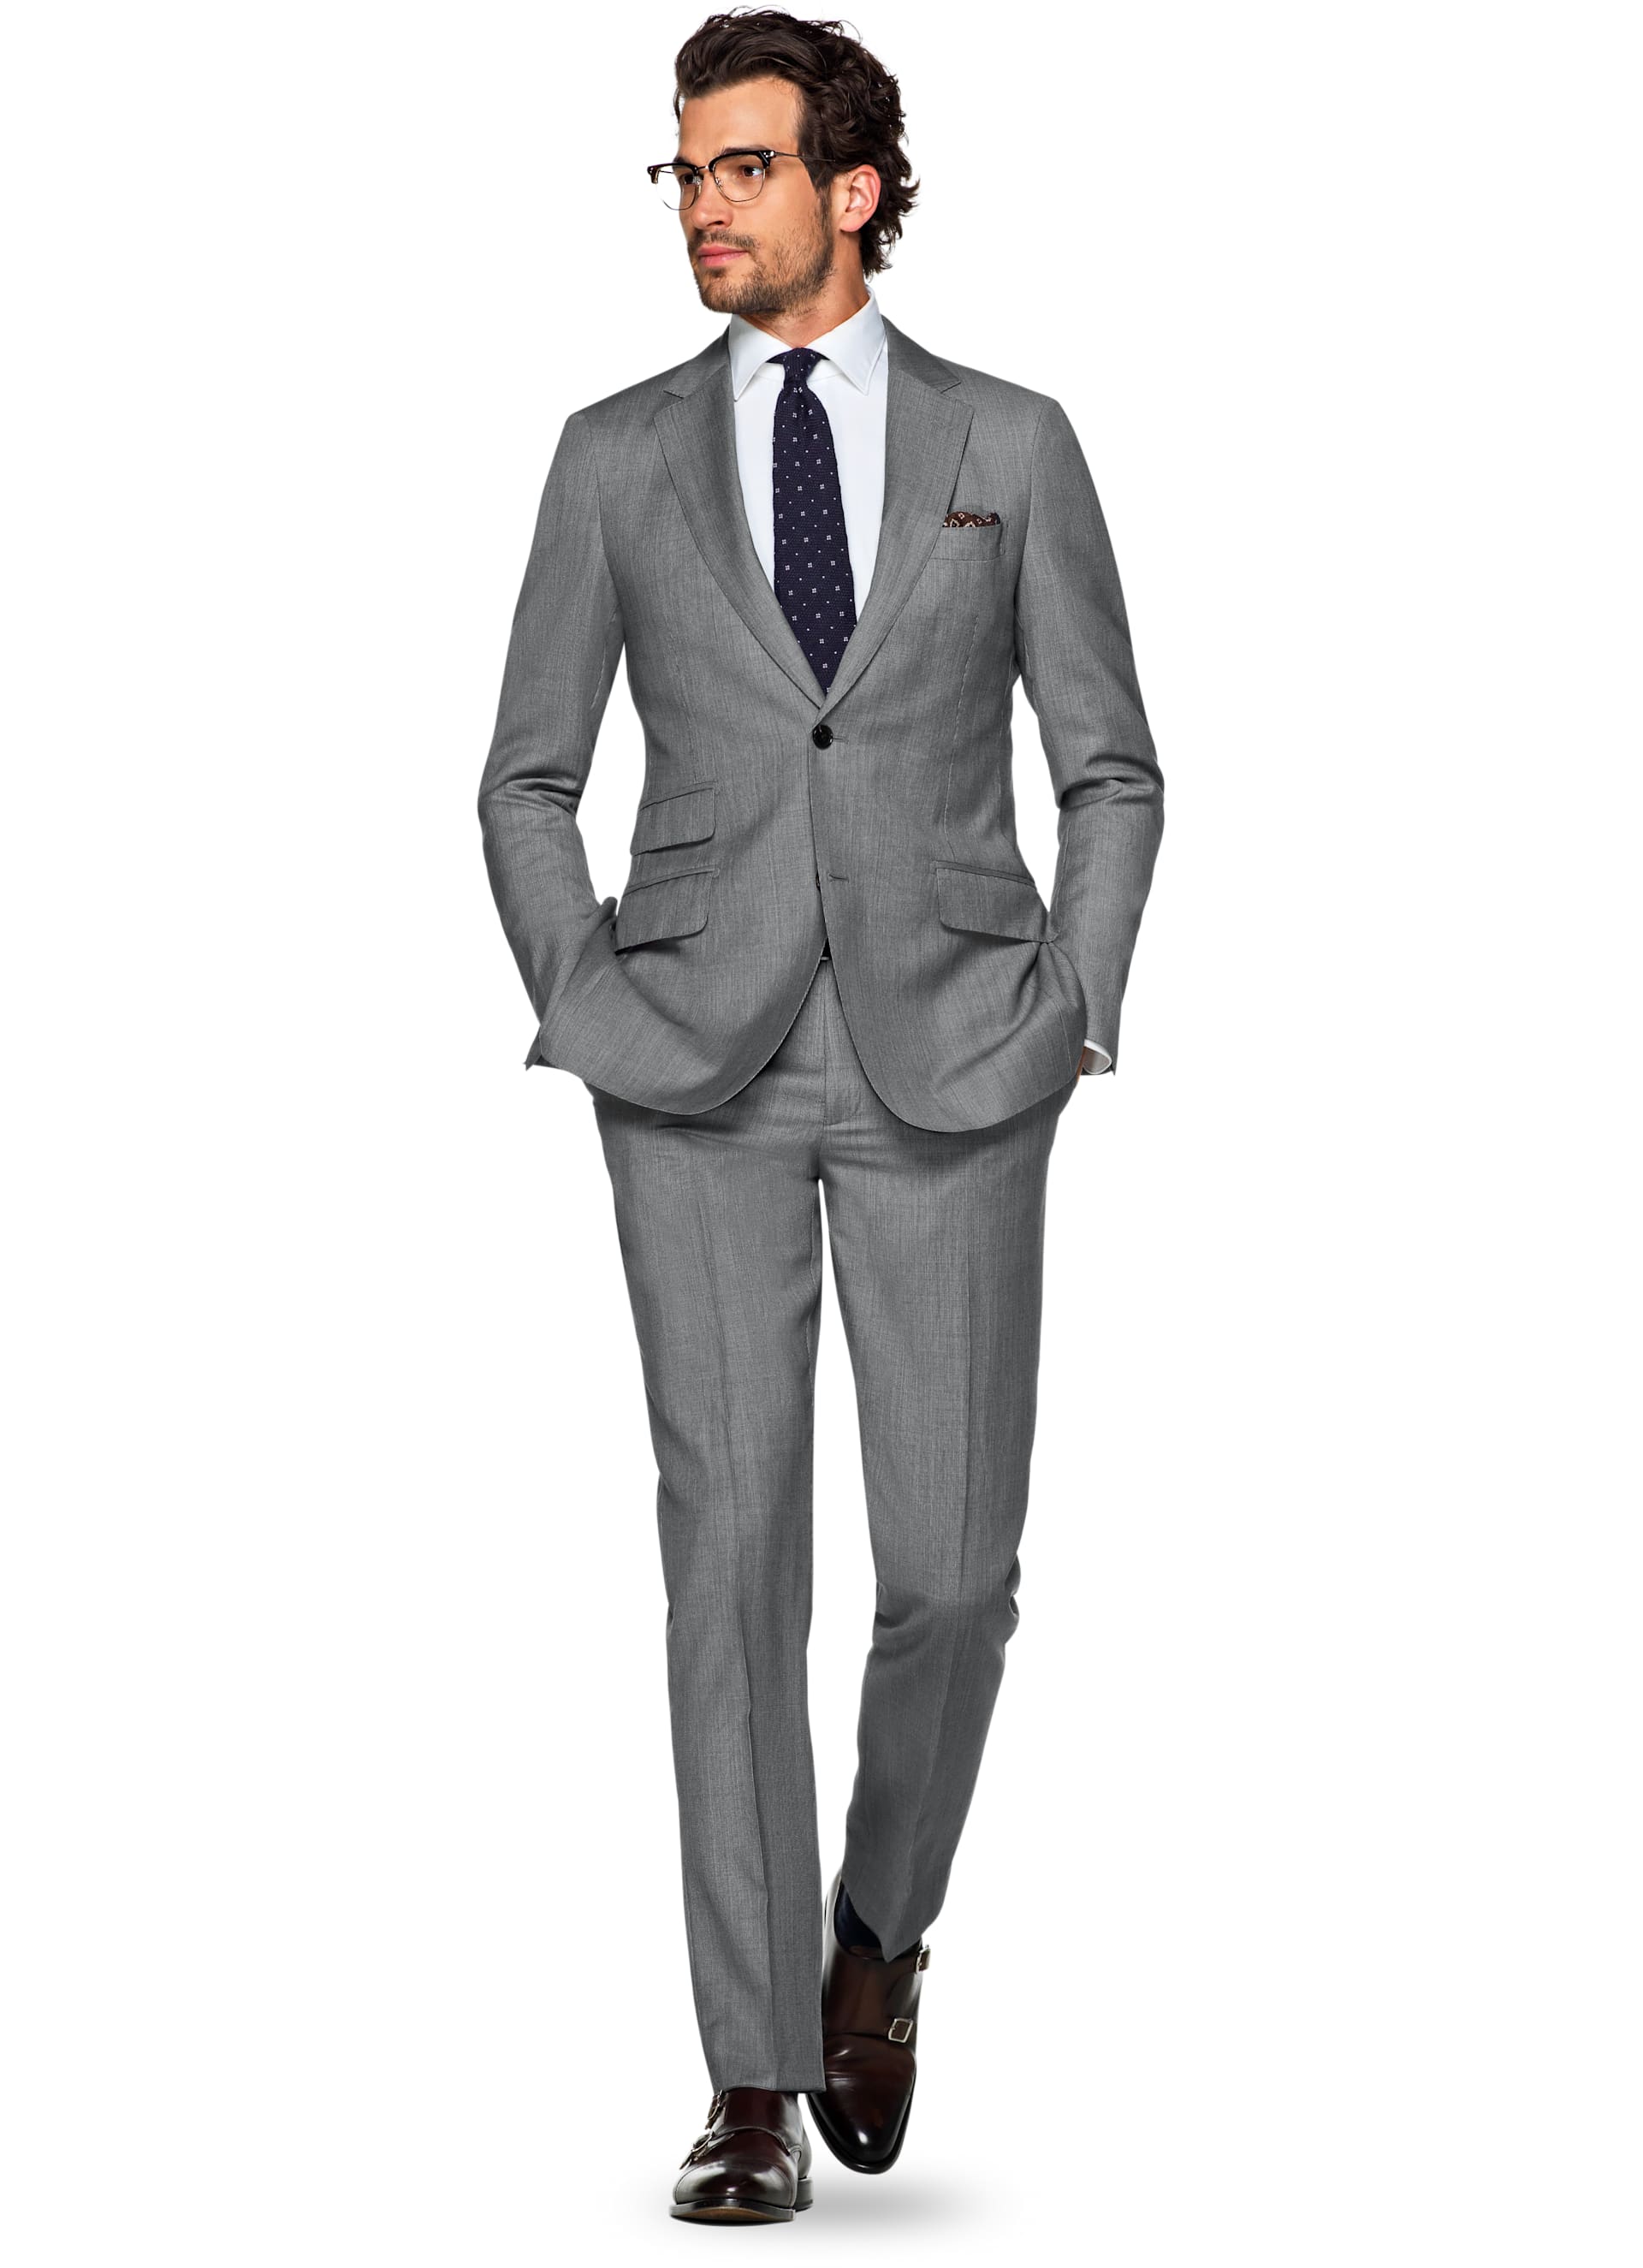 Suit Grey Plain Sienna P4842i | Suitsupply Online Store